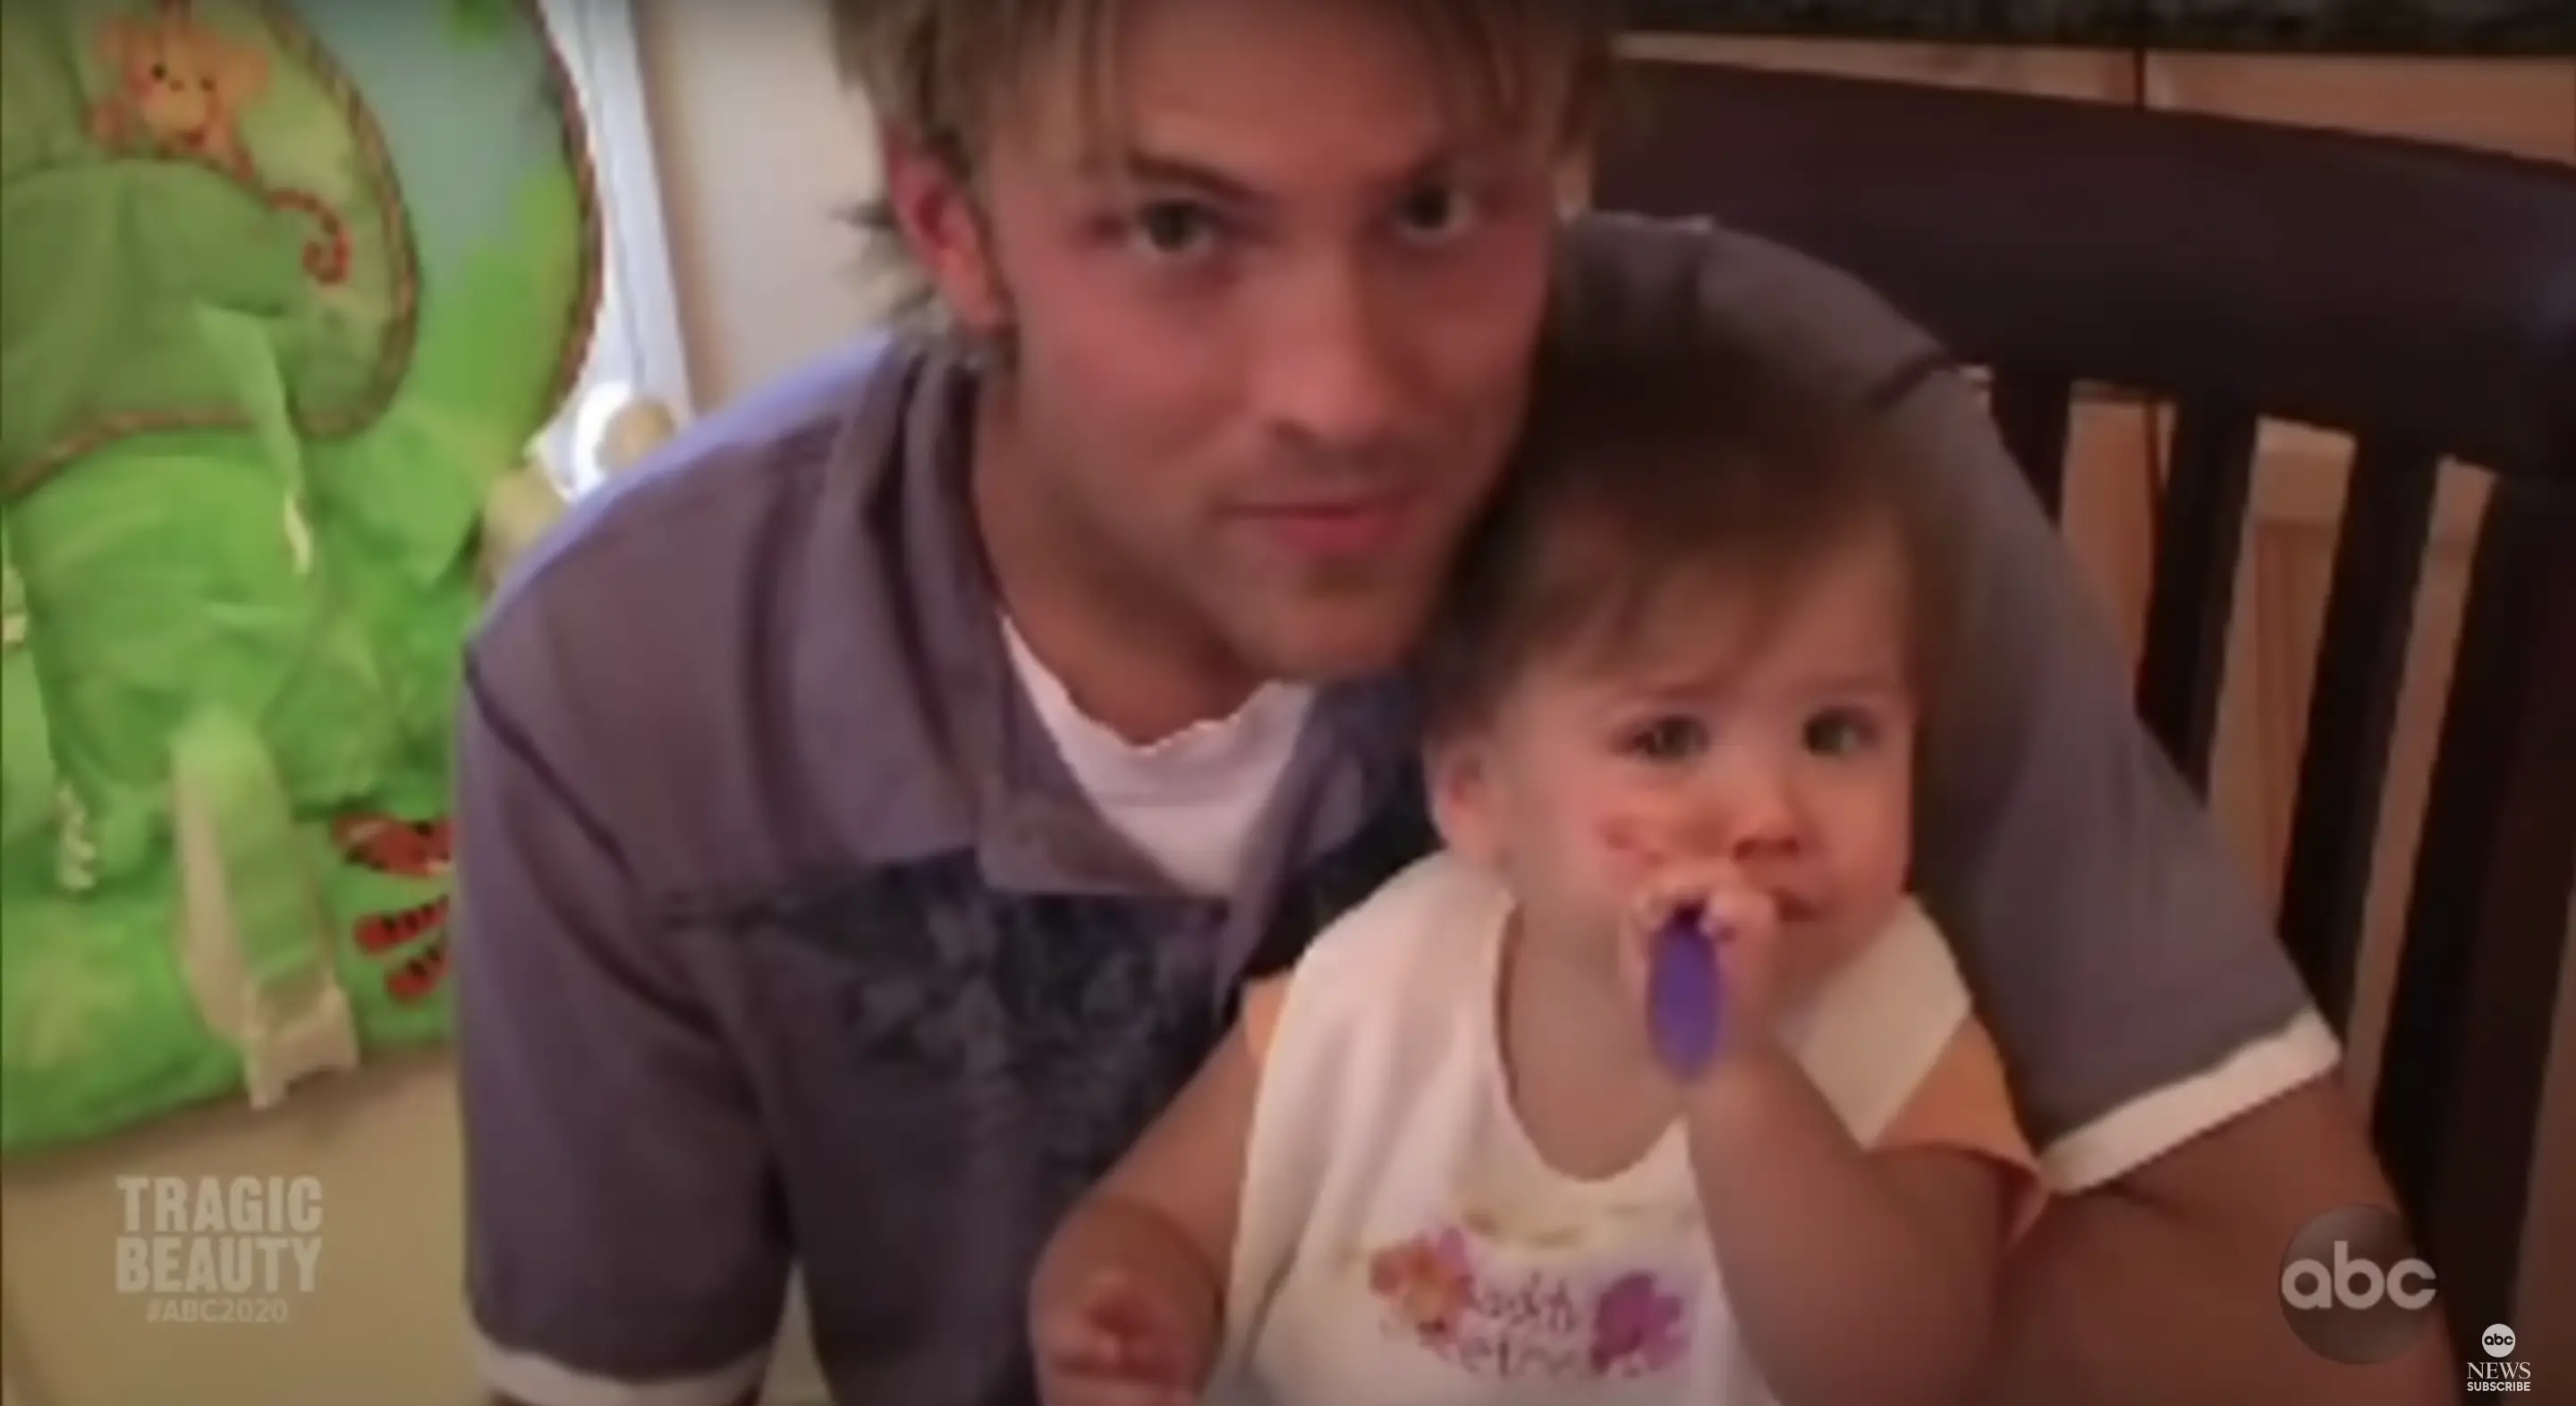 Larry Birkhead with his daughter Dannielynn | Source: Youtube.com/ABC News